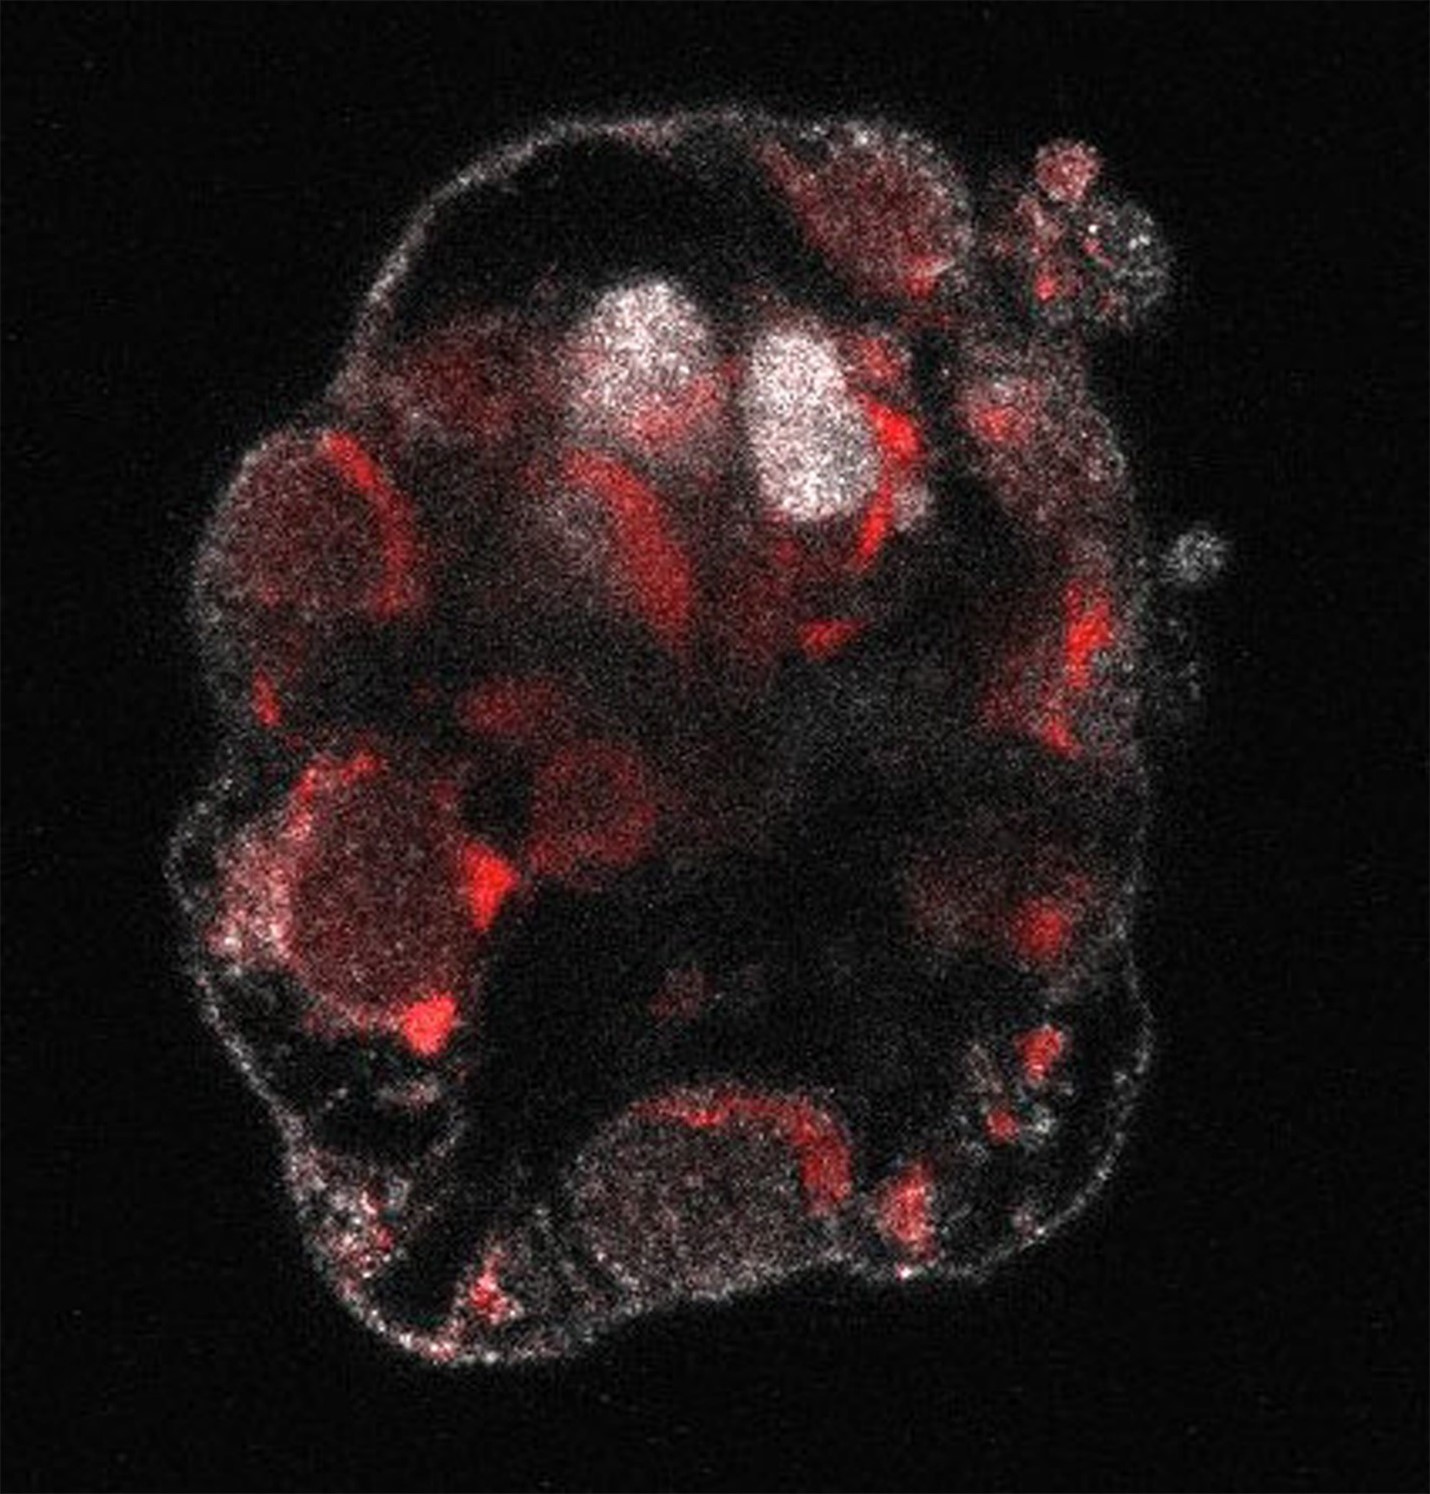 A micrograph shows a clumpy gray collection of epiblast cells — cells that would normally grow into a fetus — that are infected with Zika virus, seen as red splotches in the image. Credit: Watts, J. Ralson, A. Development. 2022